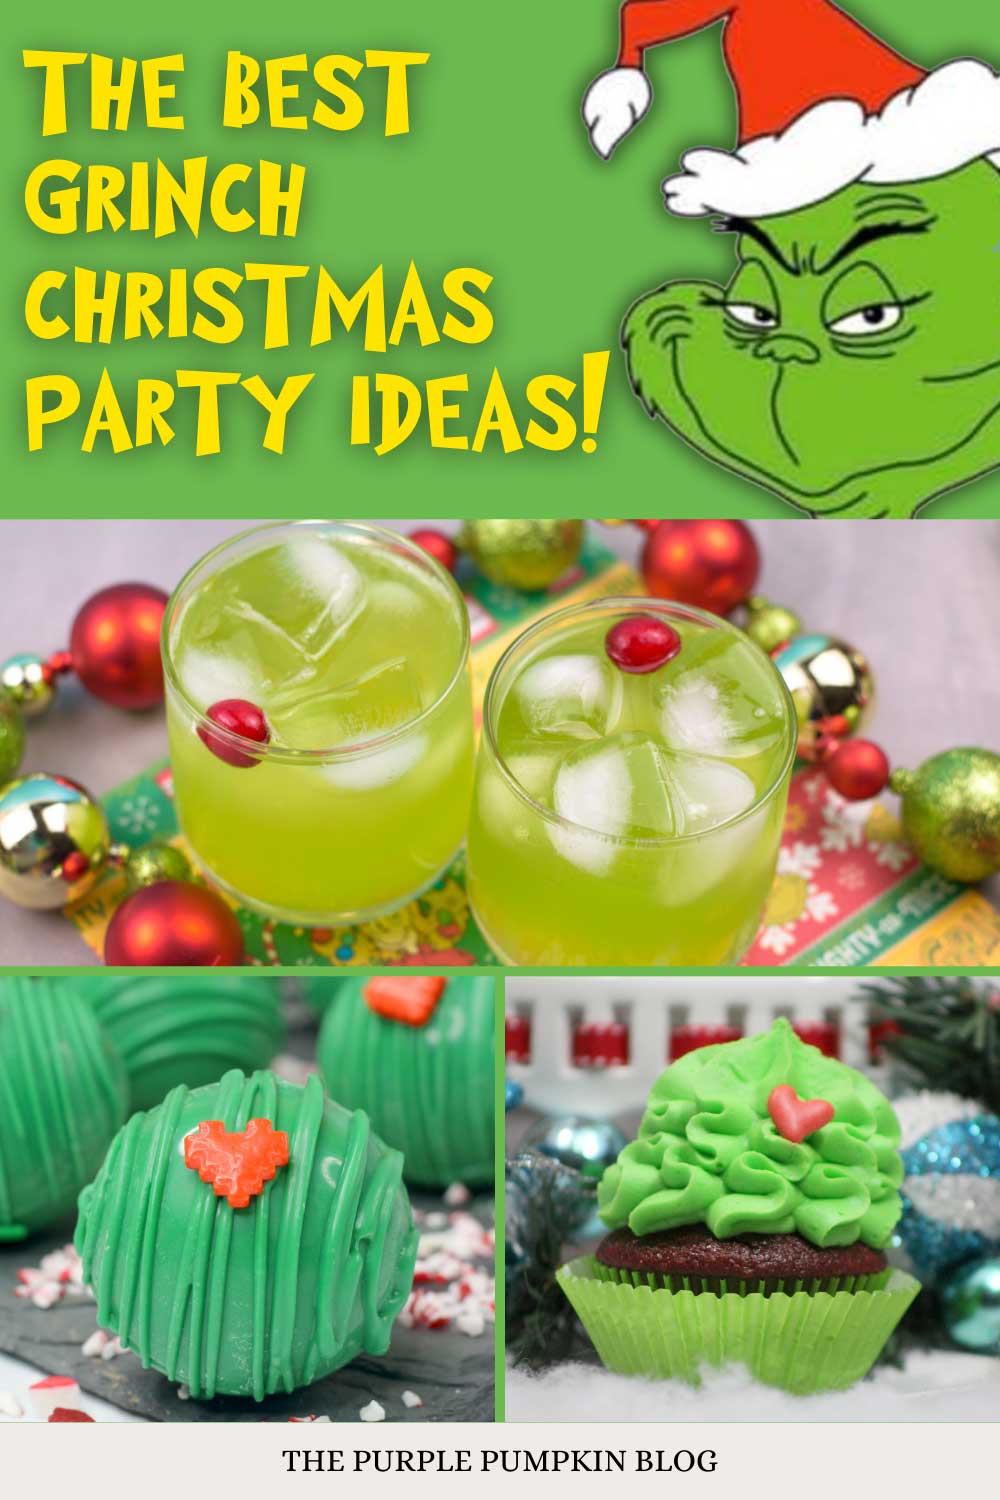 The Best Grinch Christmas Party Ideas - images of green sweet treats